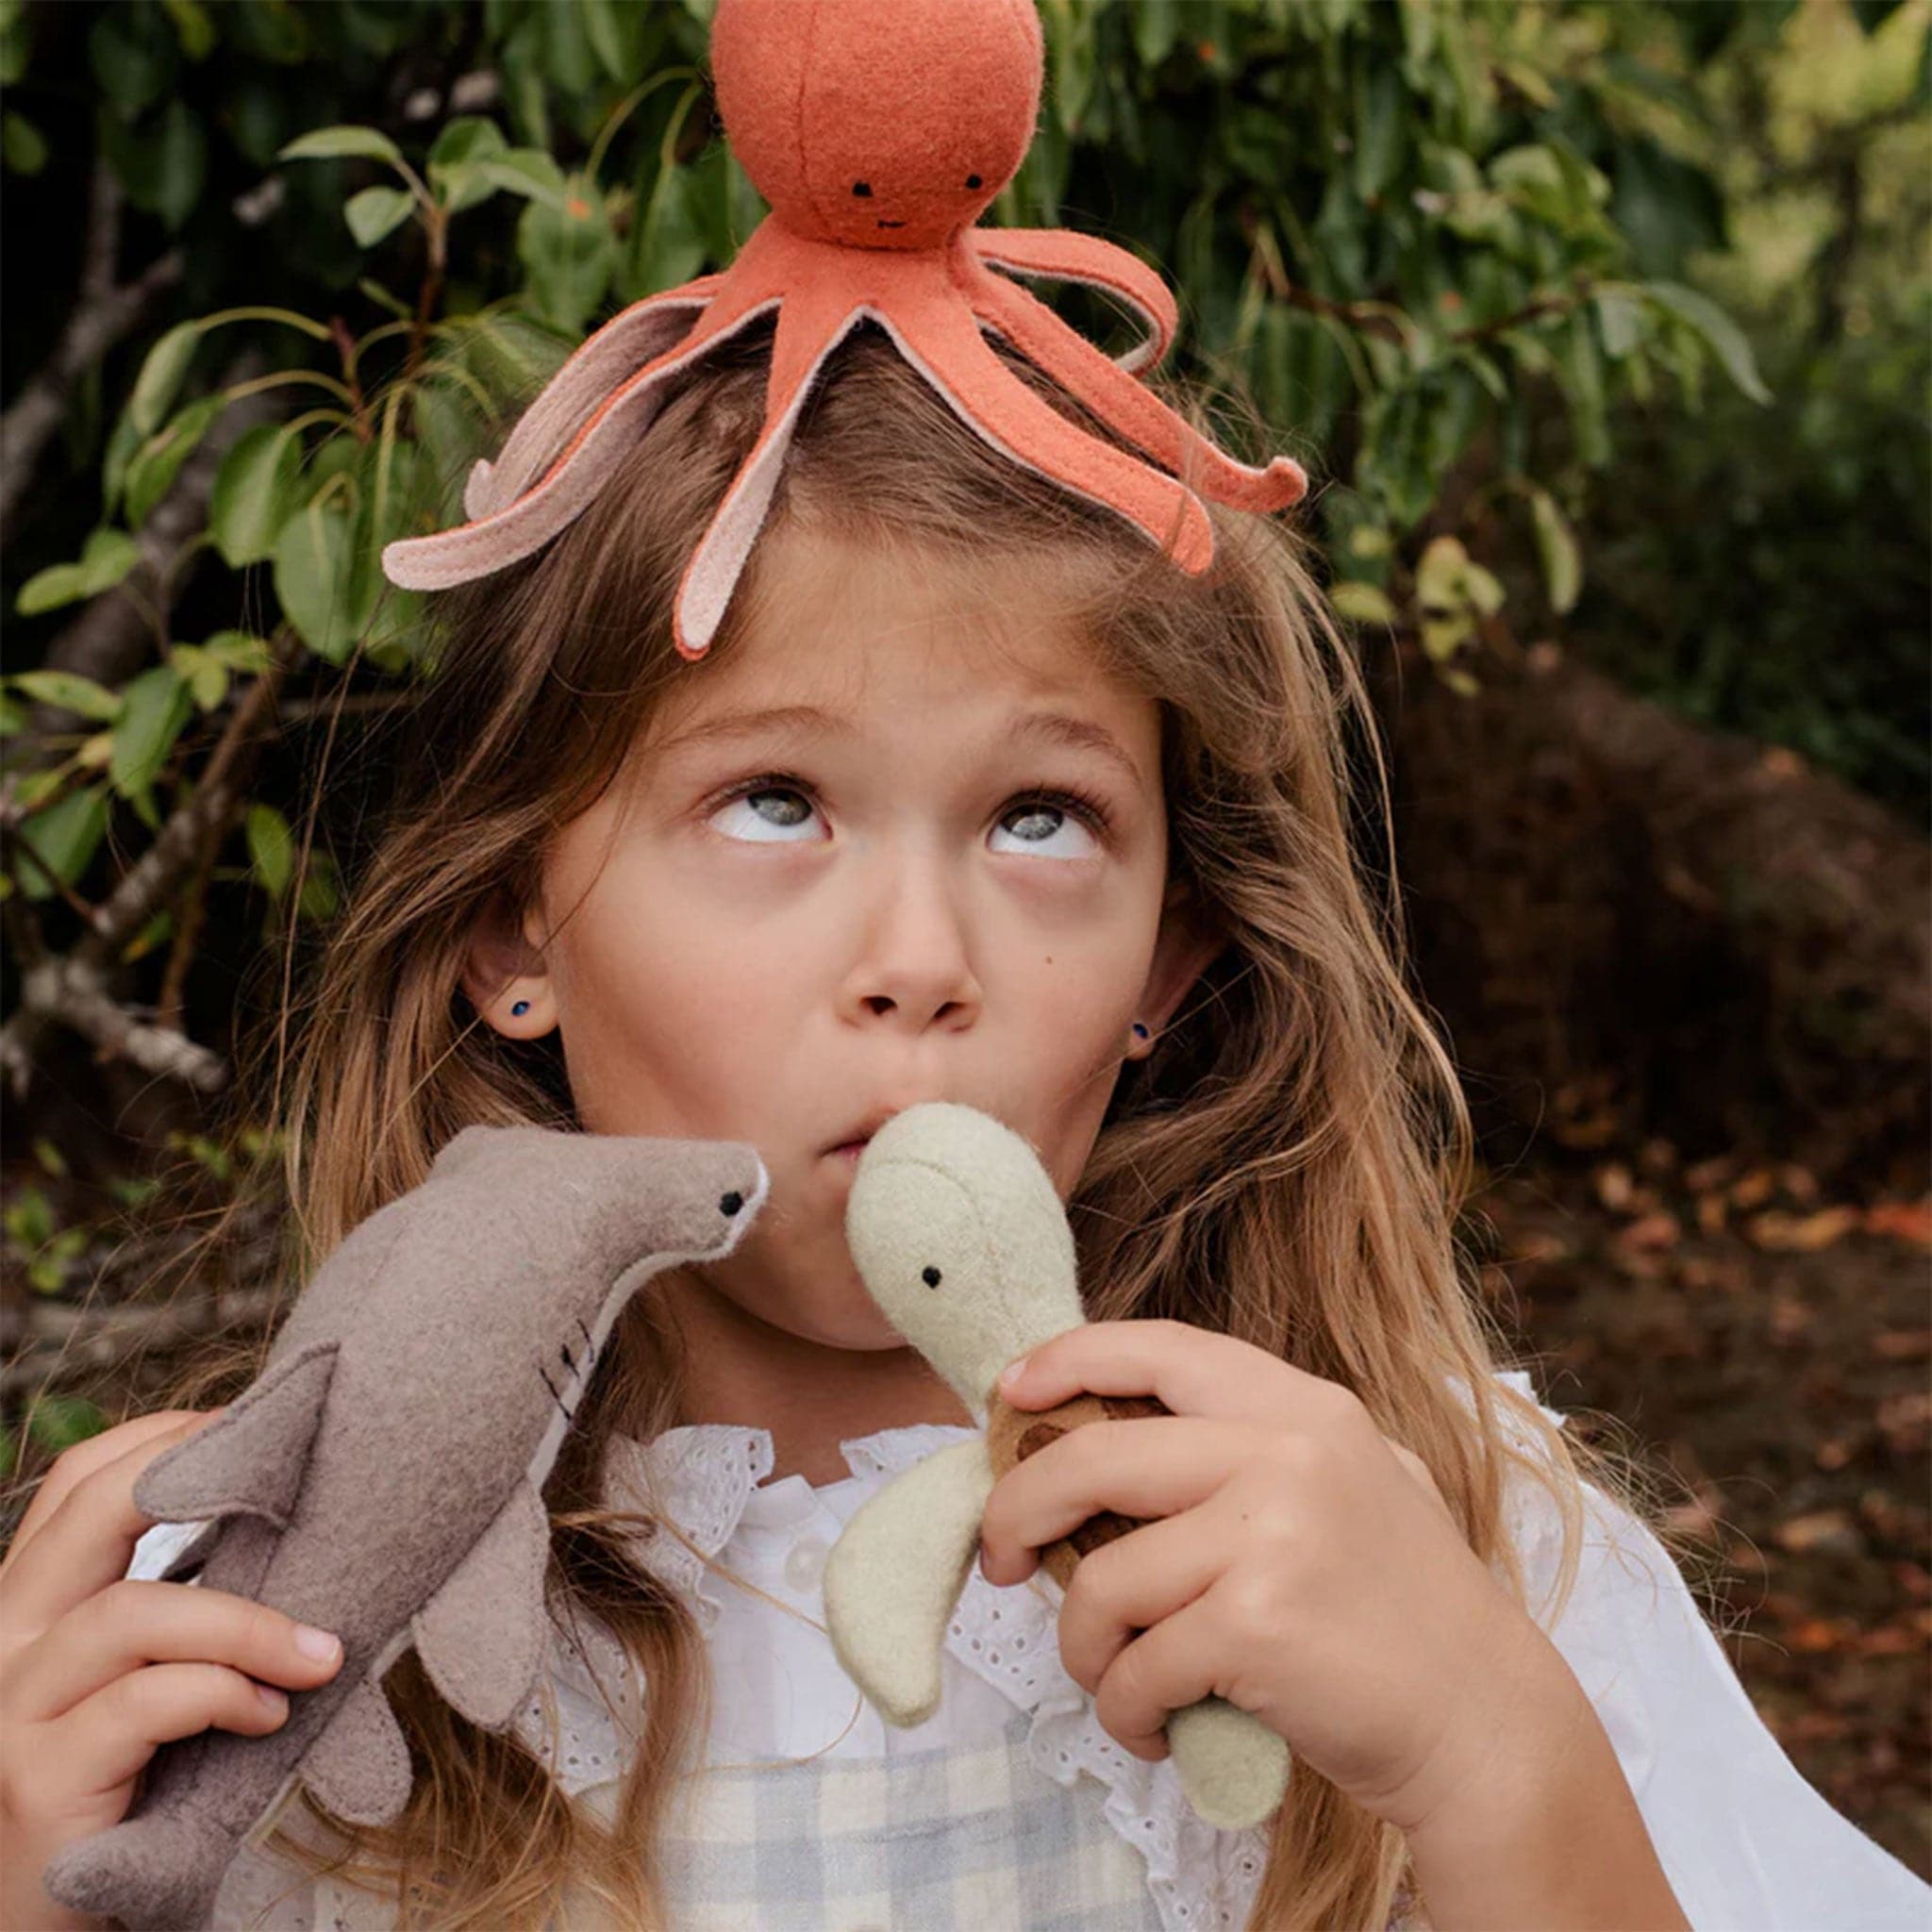 A little girl holding the three marine inspired stuffed toys, that includes an orangey red octopus, a great hammerhead shark and a green and brown sea turtle.